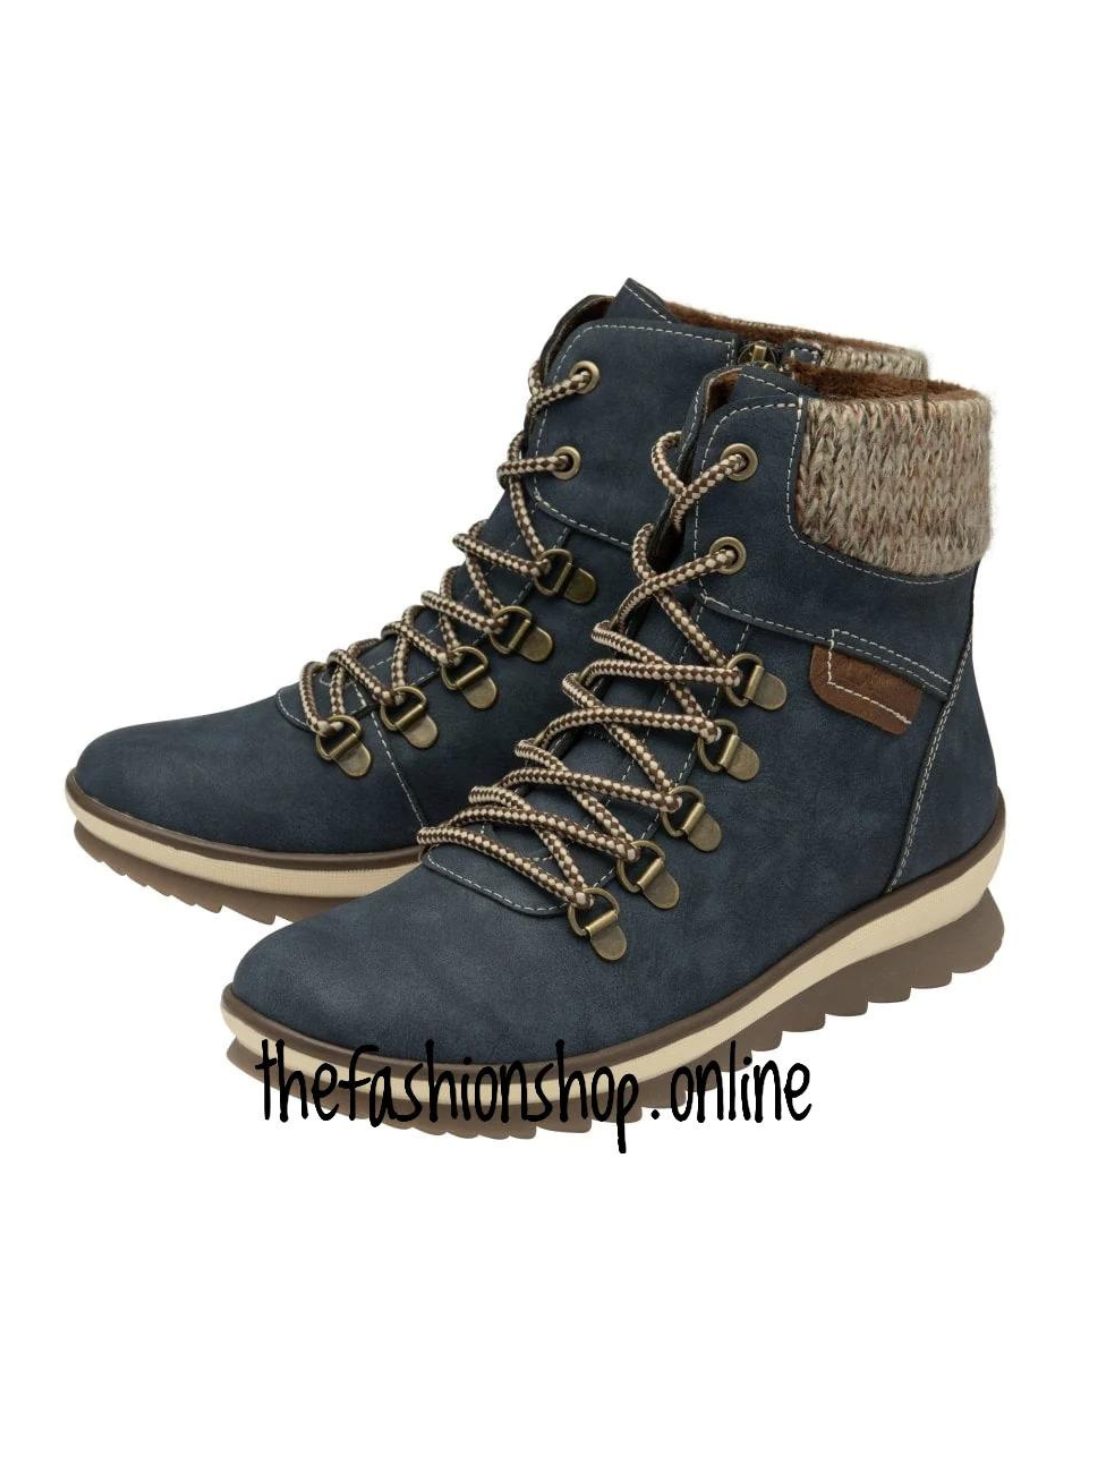 Lotus Libby blue ankle boot with side zip sizes 4-8